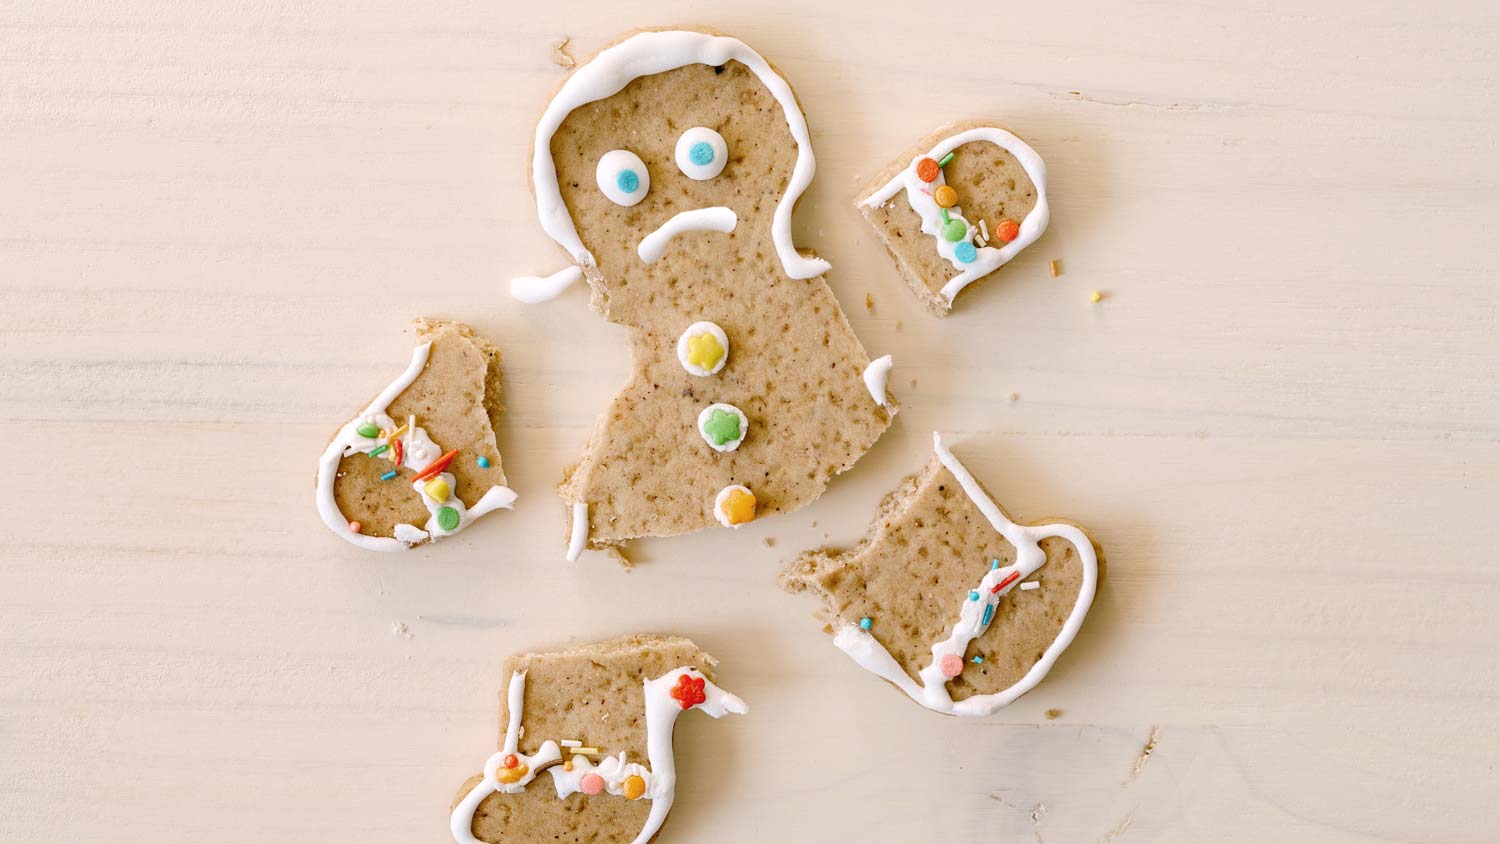 Broken holiday cookie frowning